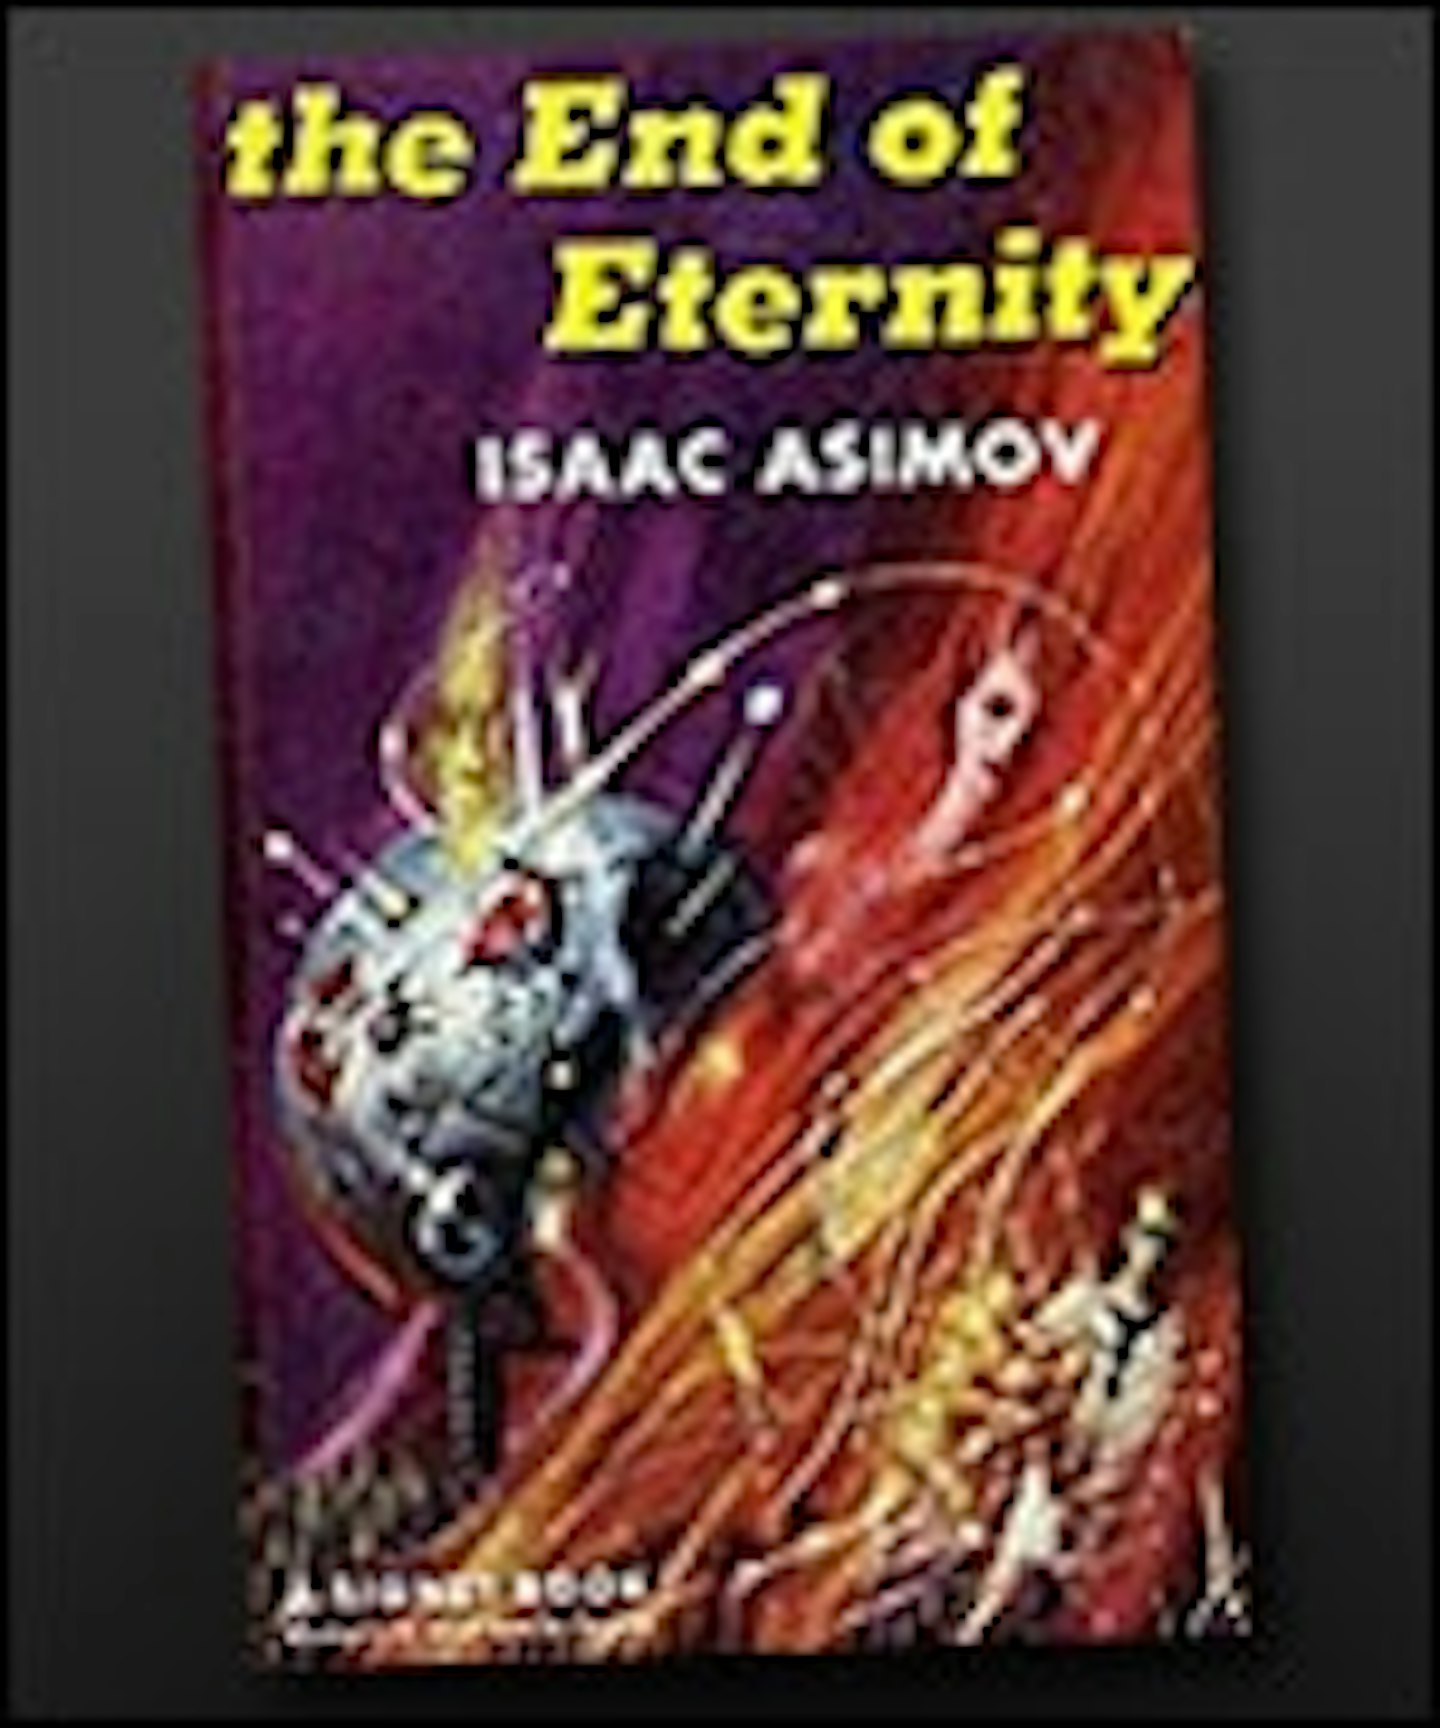 Asimov's The End Of Eternity Is Coming